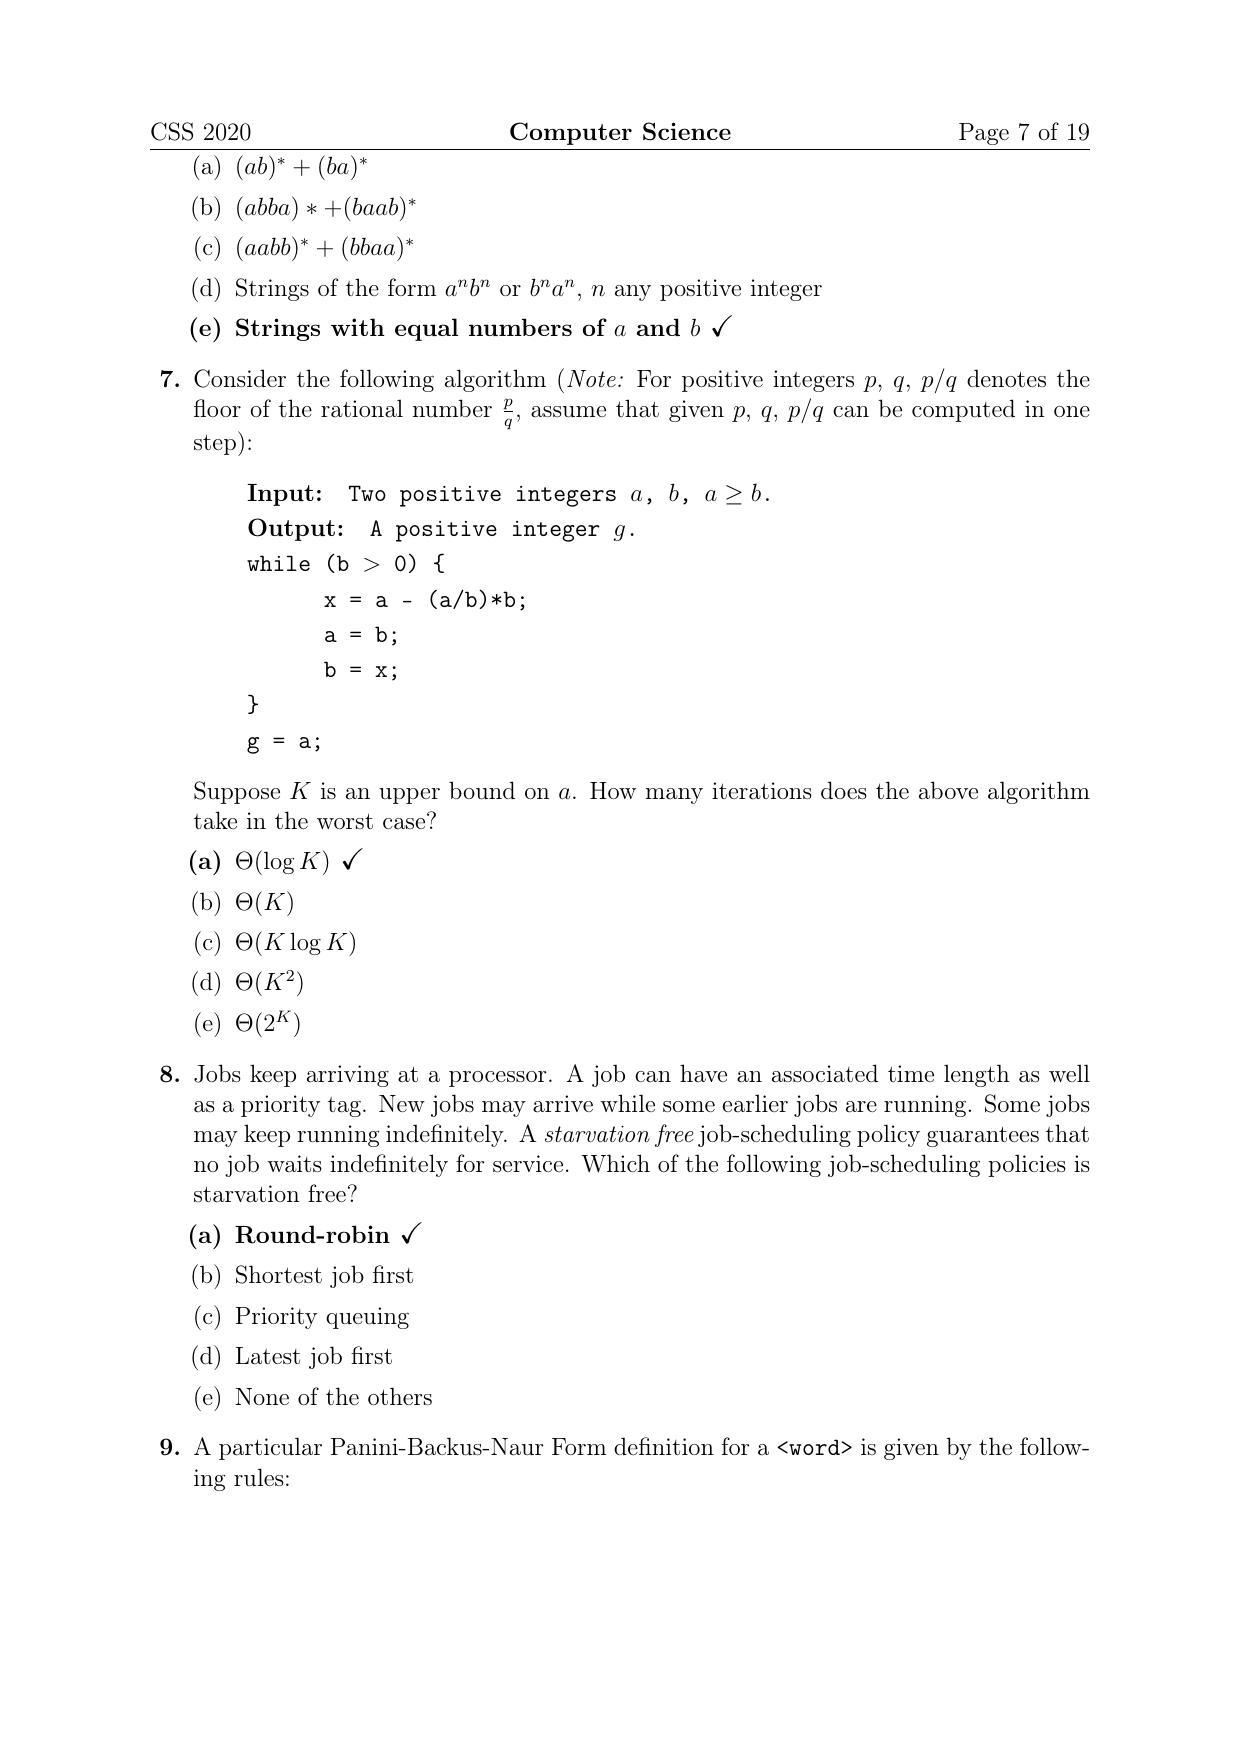 TIFR GS 2020 Computer & Systems Sciences Question Paper - Page 7